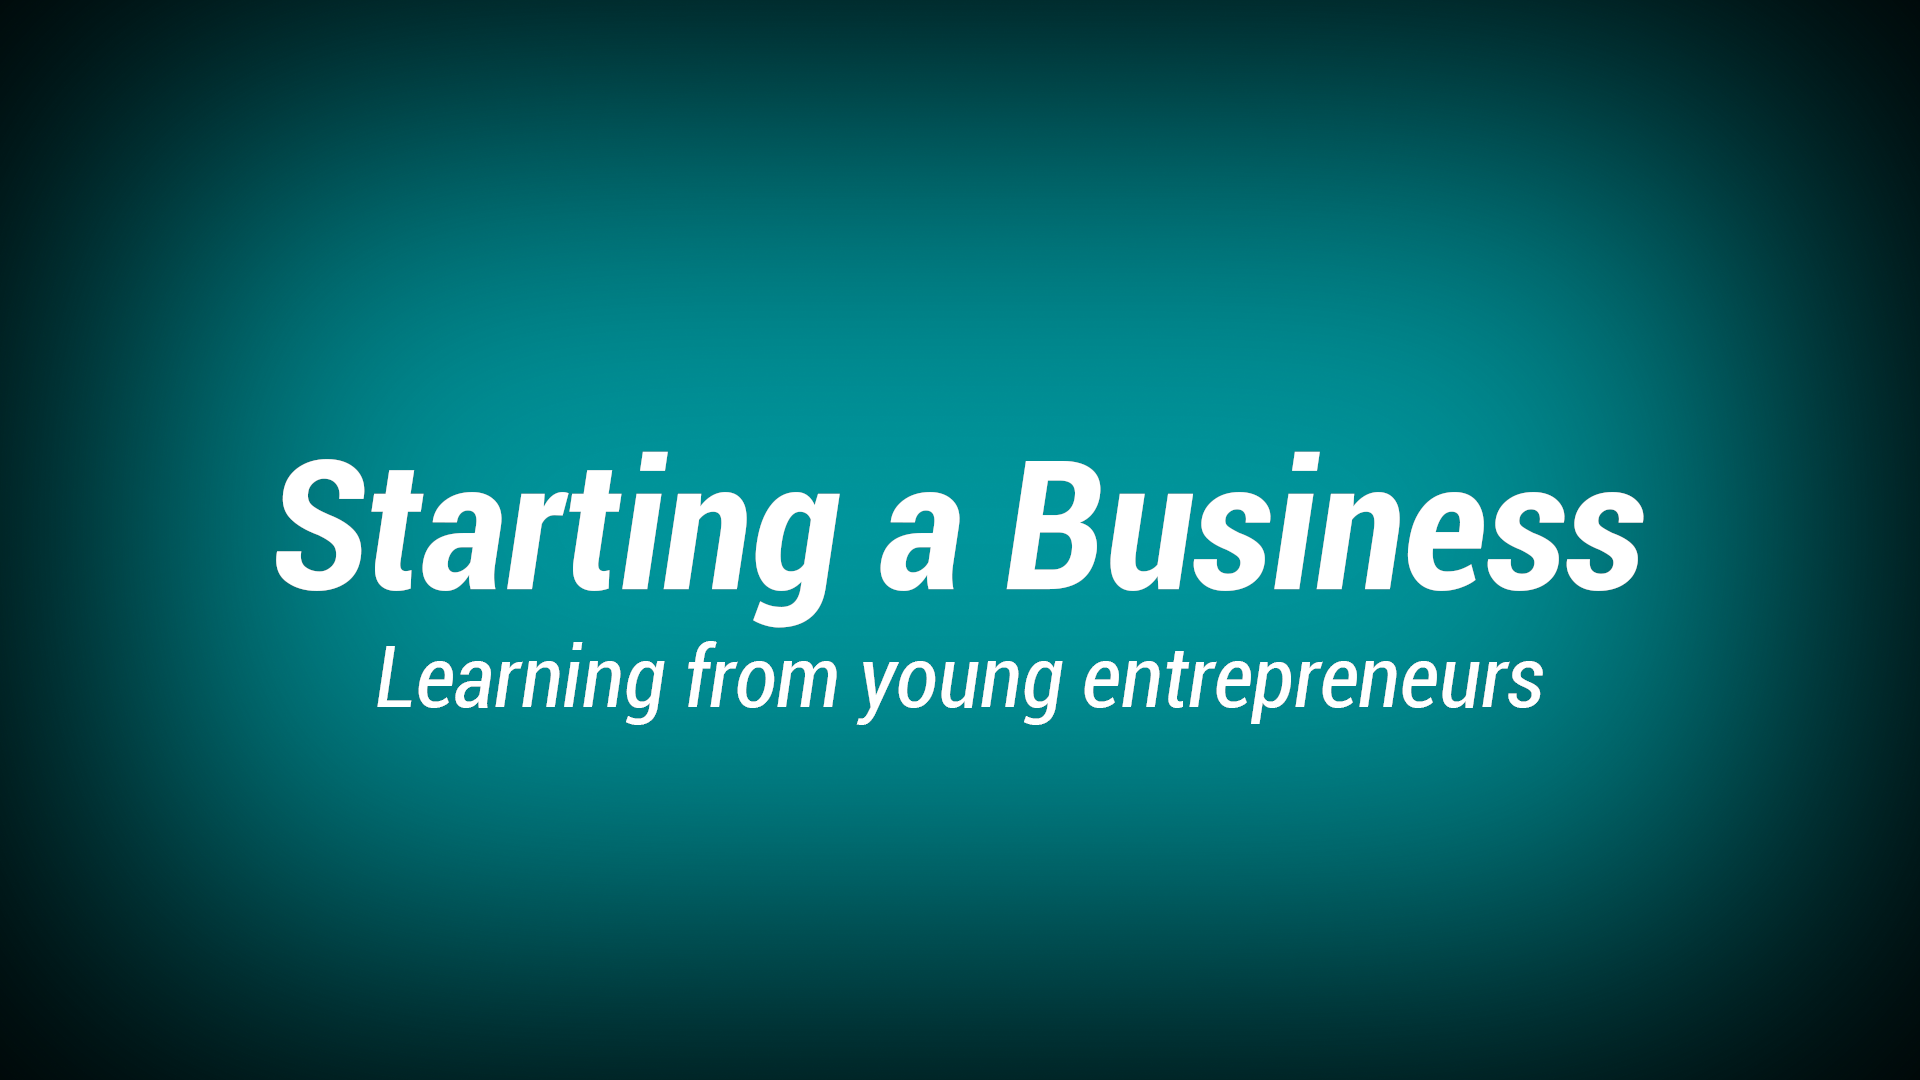 7. Starting a business / Difficulties